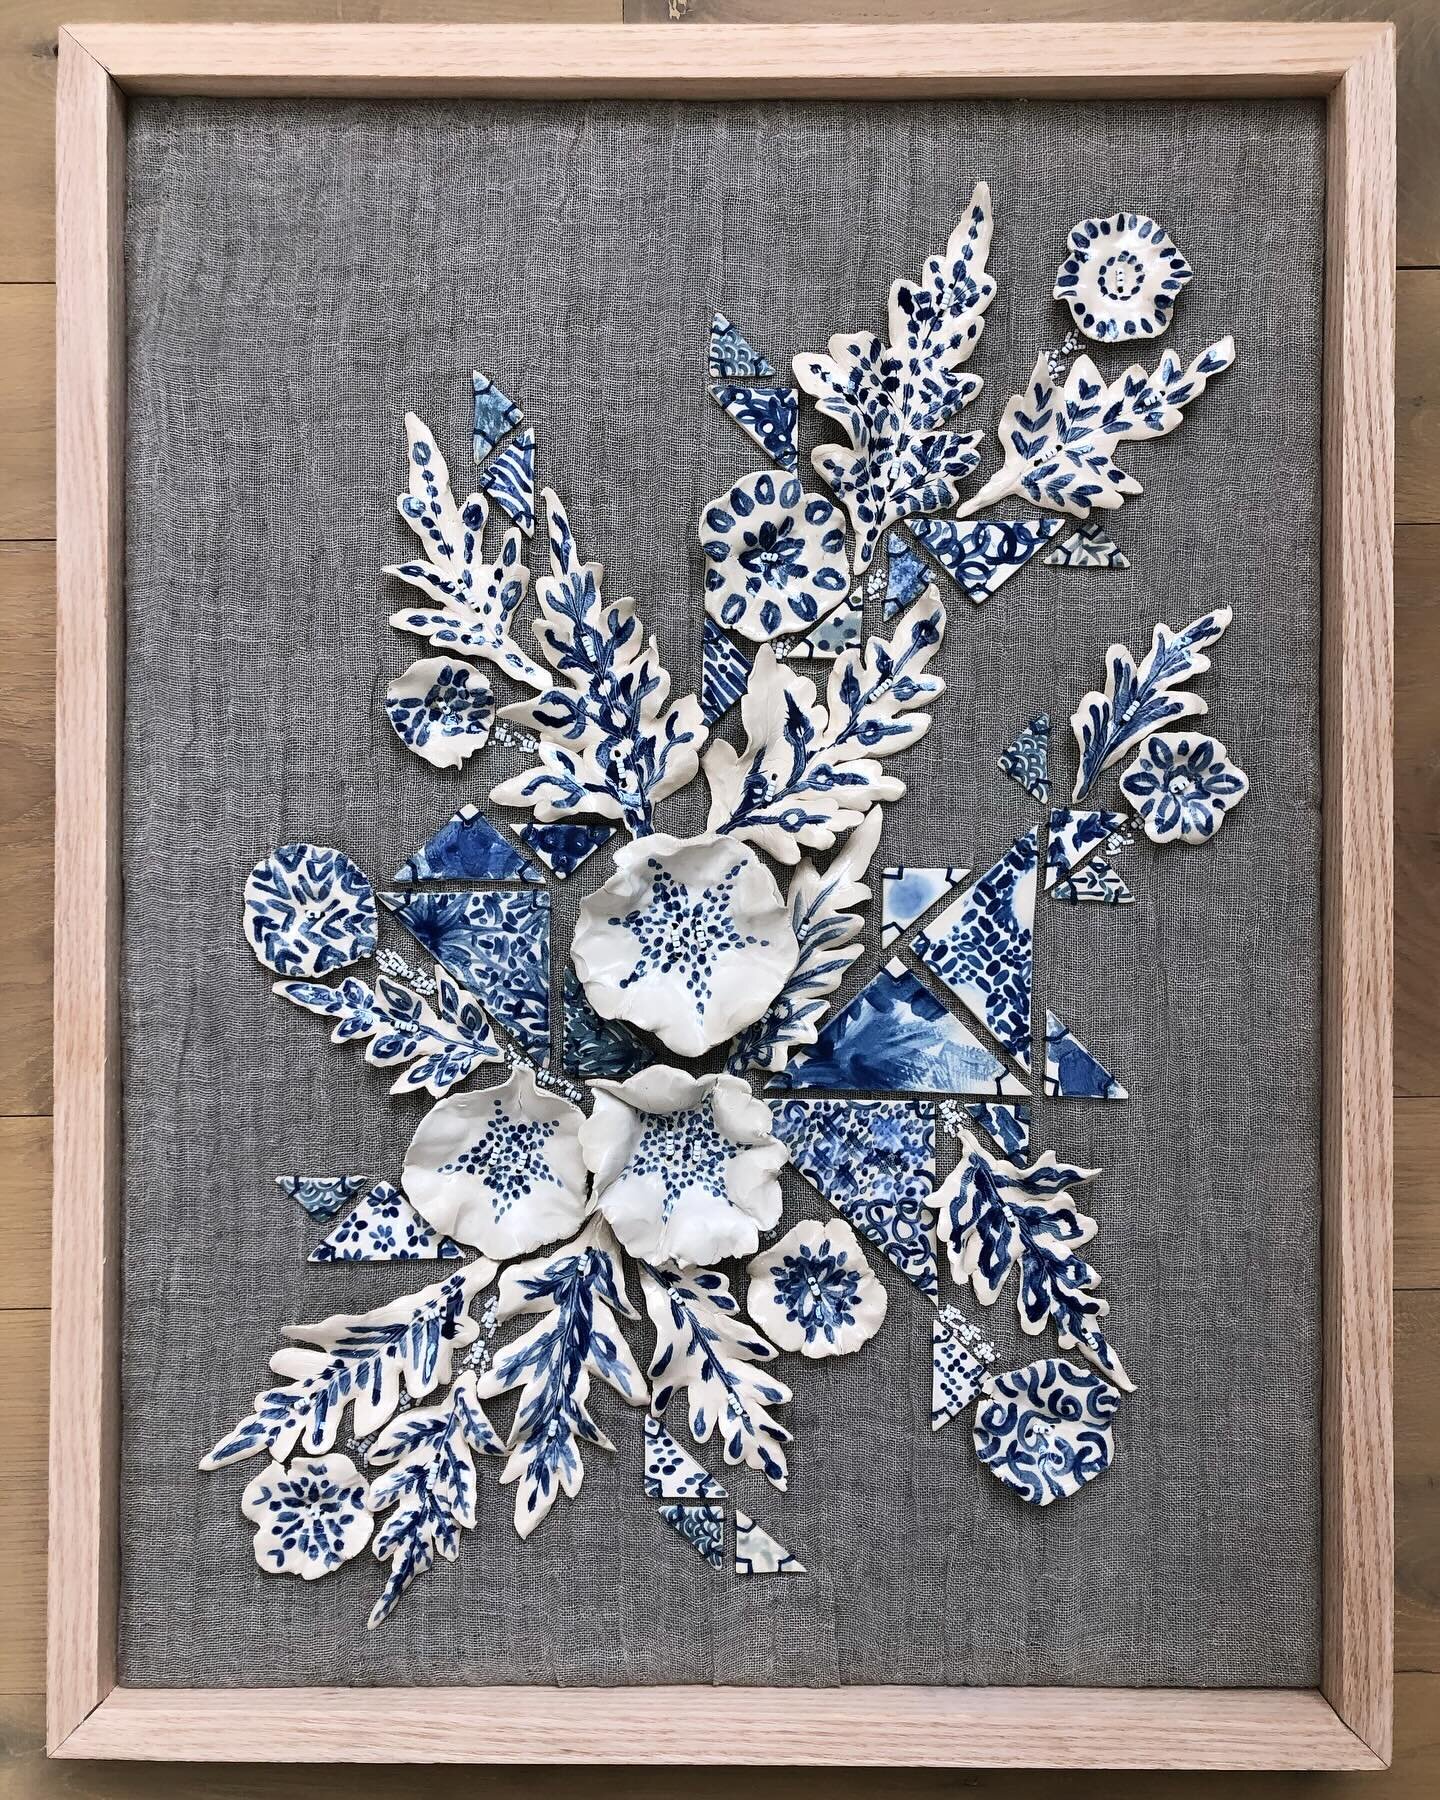 This piece from a few years ago has been on my mind. 💙 I feel like a blue and white &ldquo;ceramics on canvas&rdquo; piece will be coming forth soon from my recent studio time. 🥰💫

This one has ceramics sewn onto linen-wrapped canvas with delicate